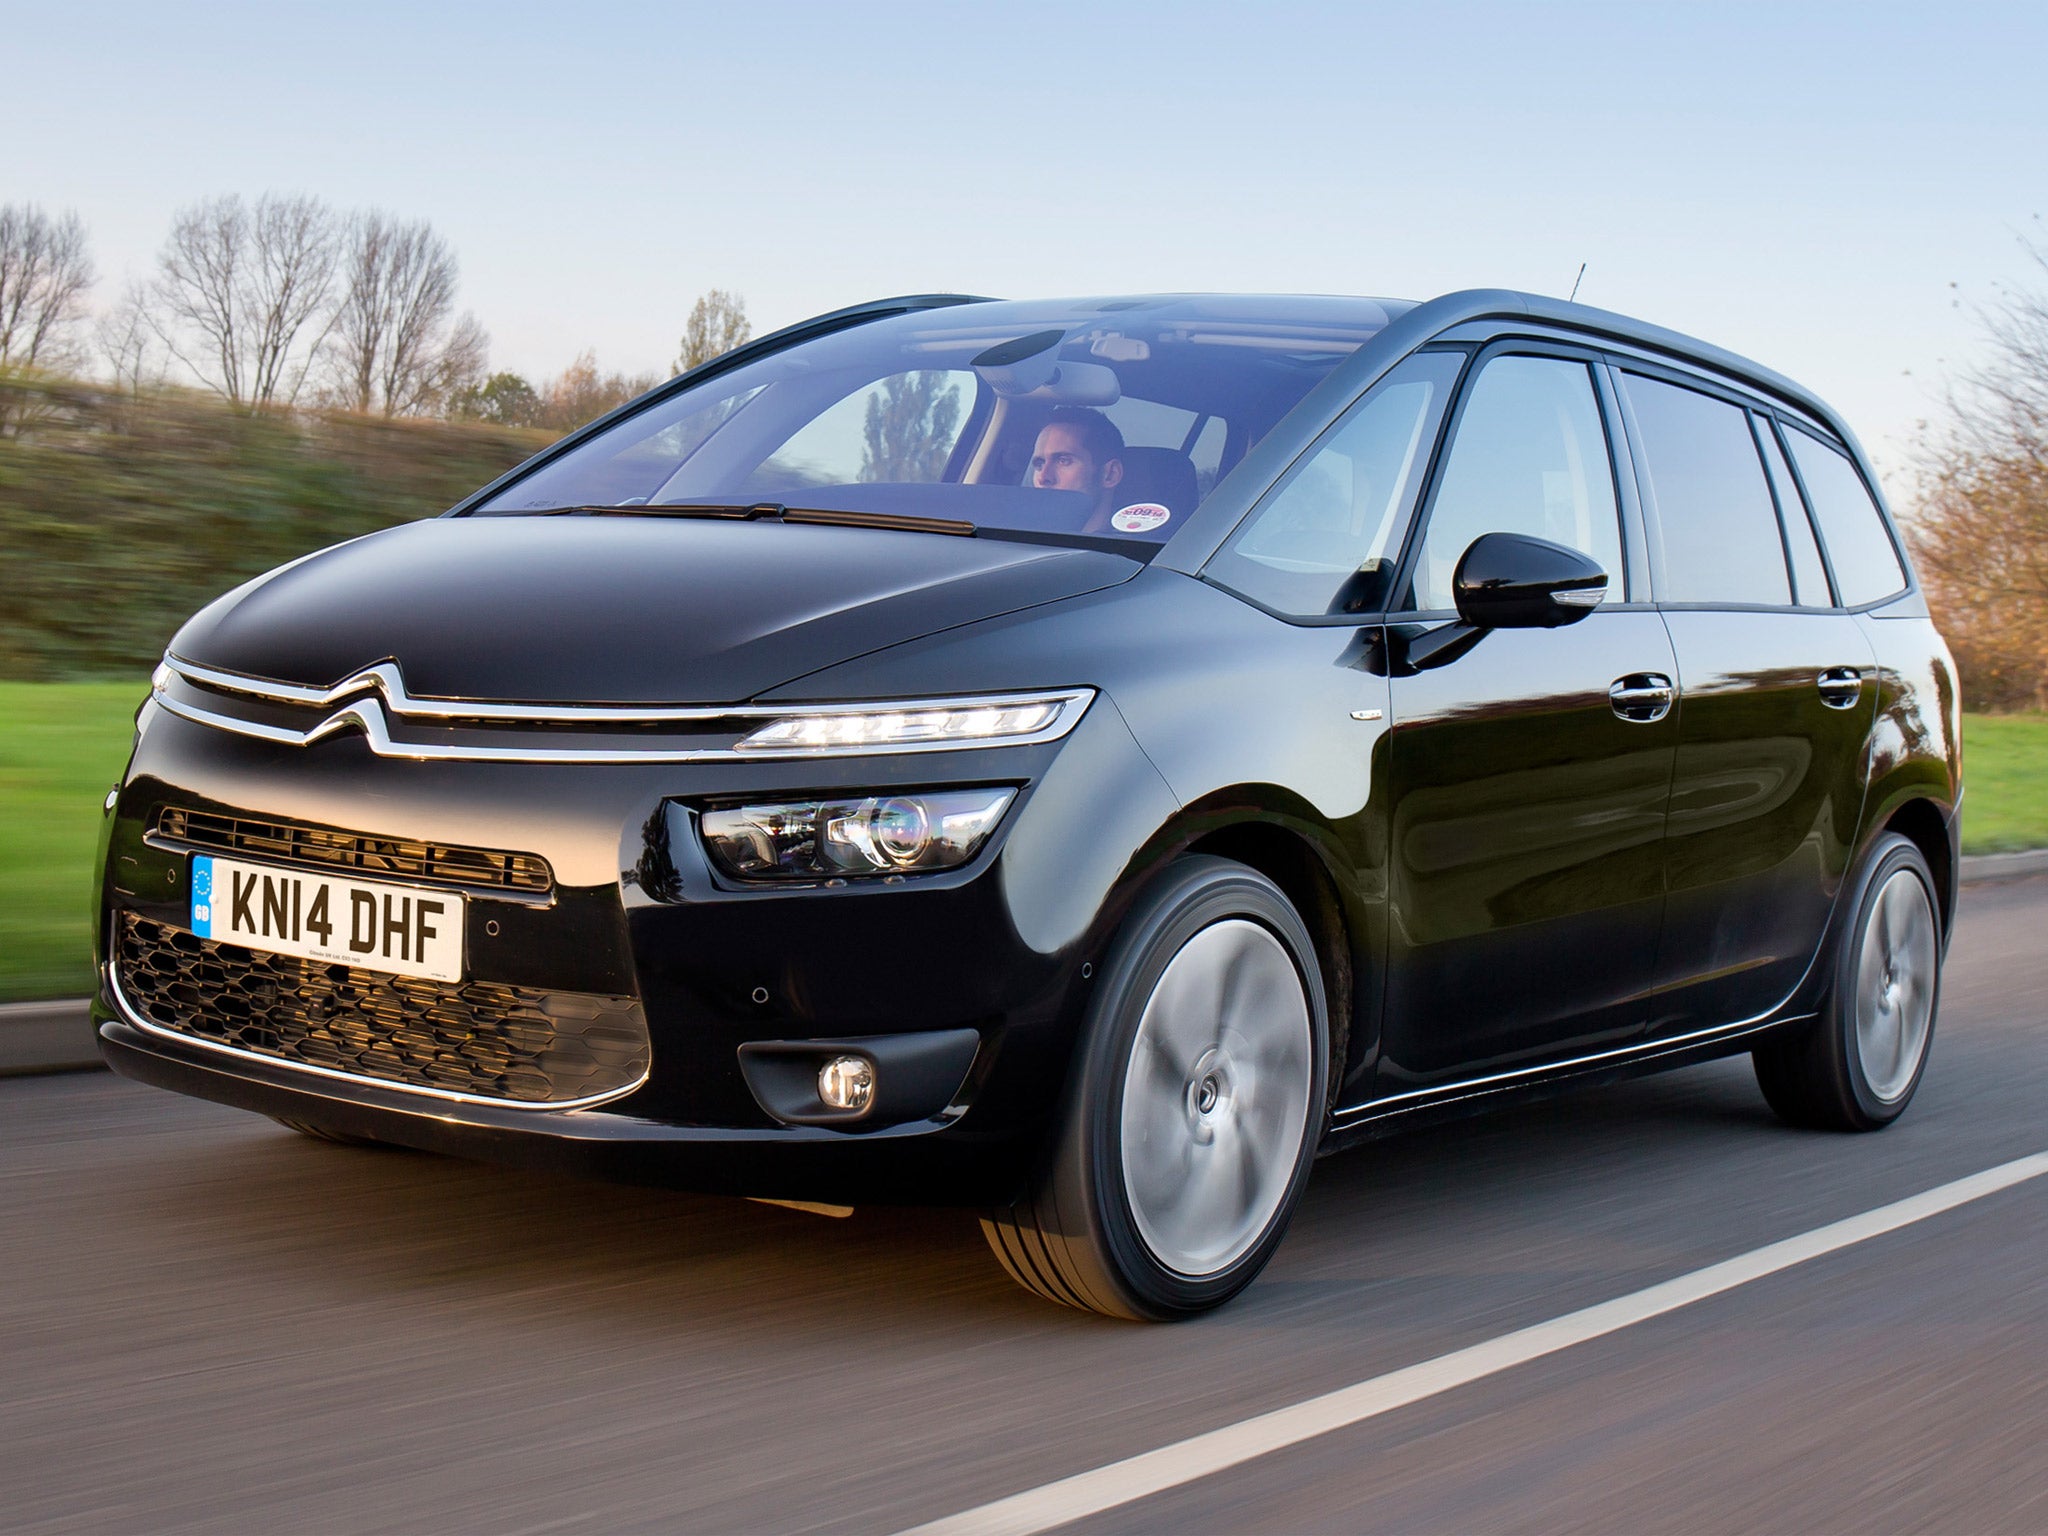 Smooth and compliant: the new Citroën C4 Grand Picasso